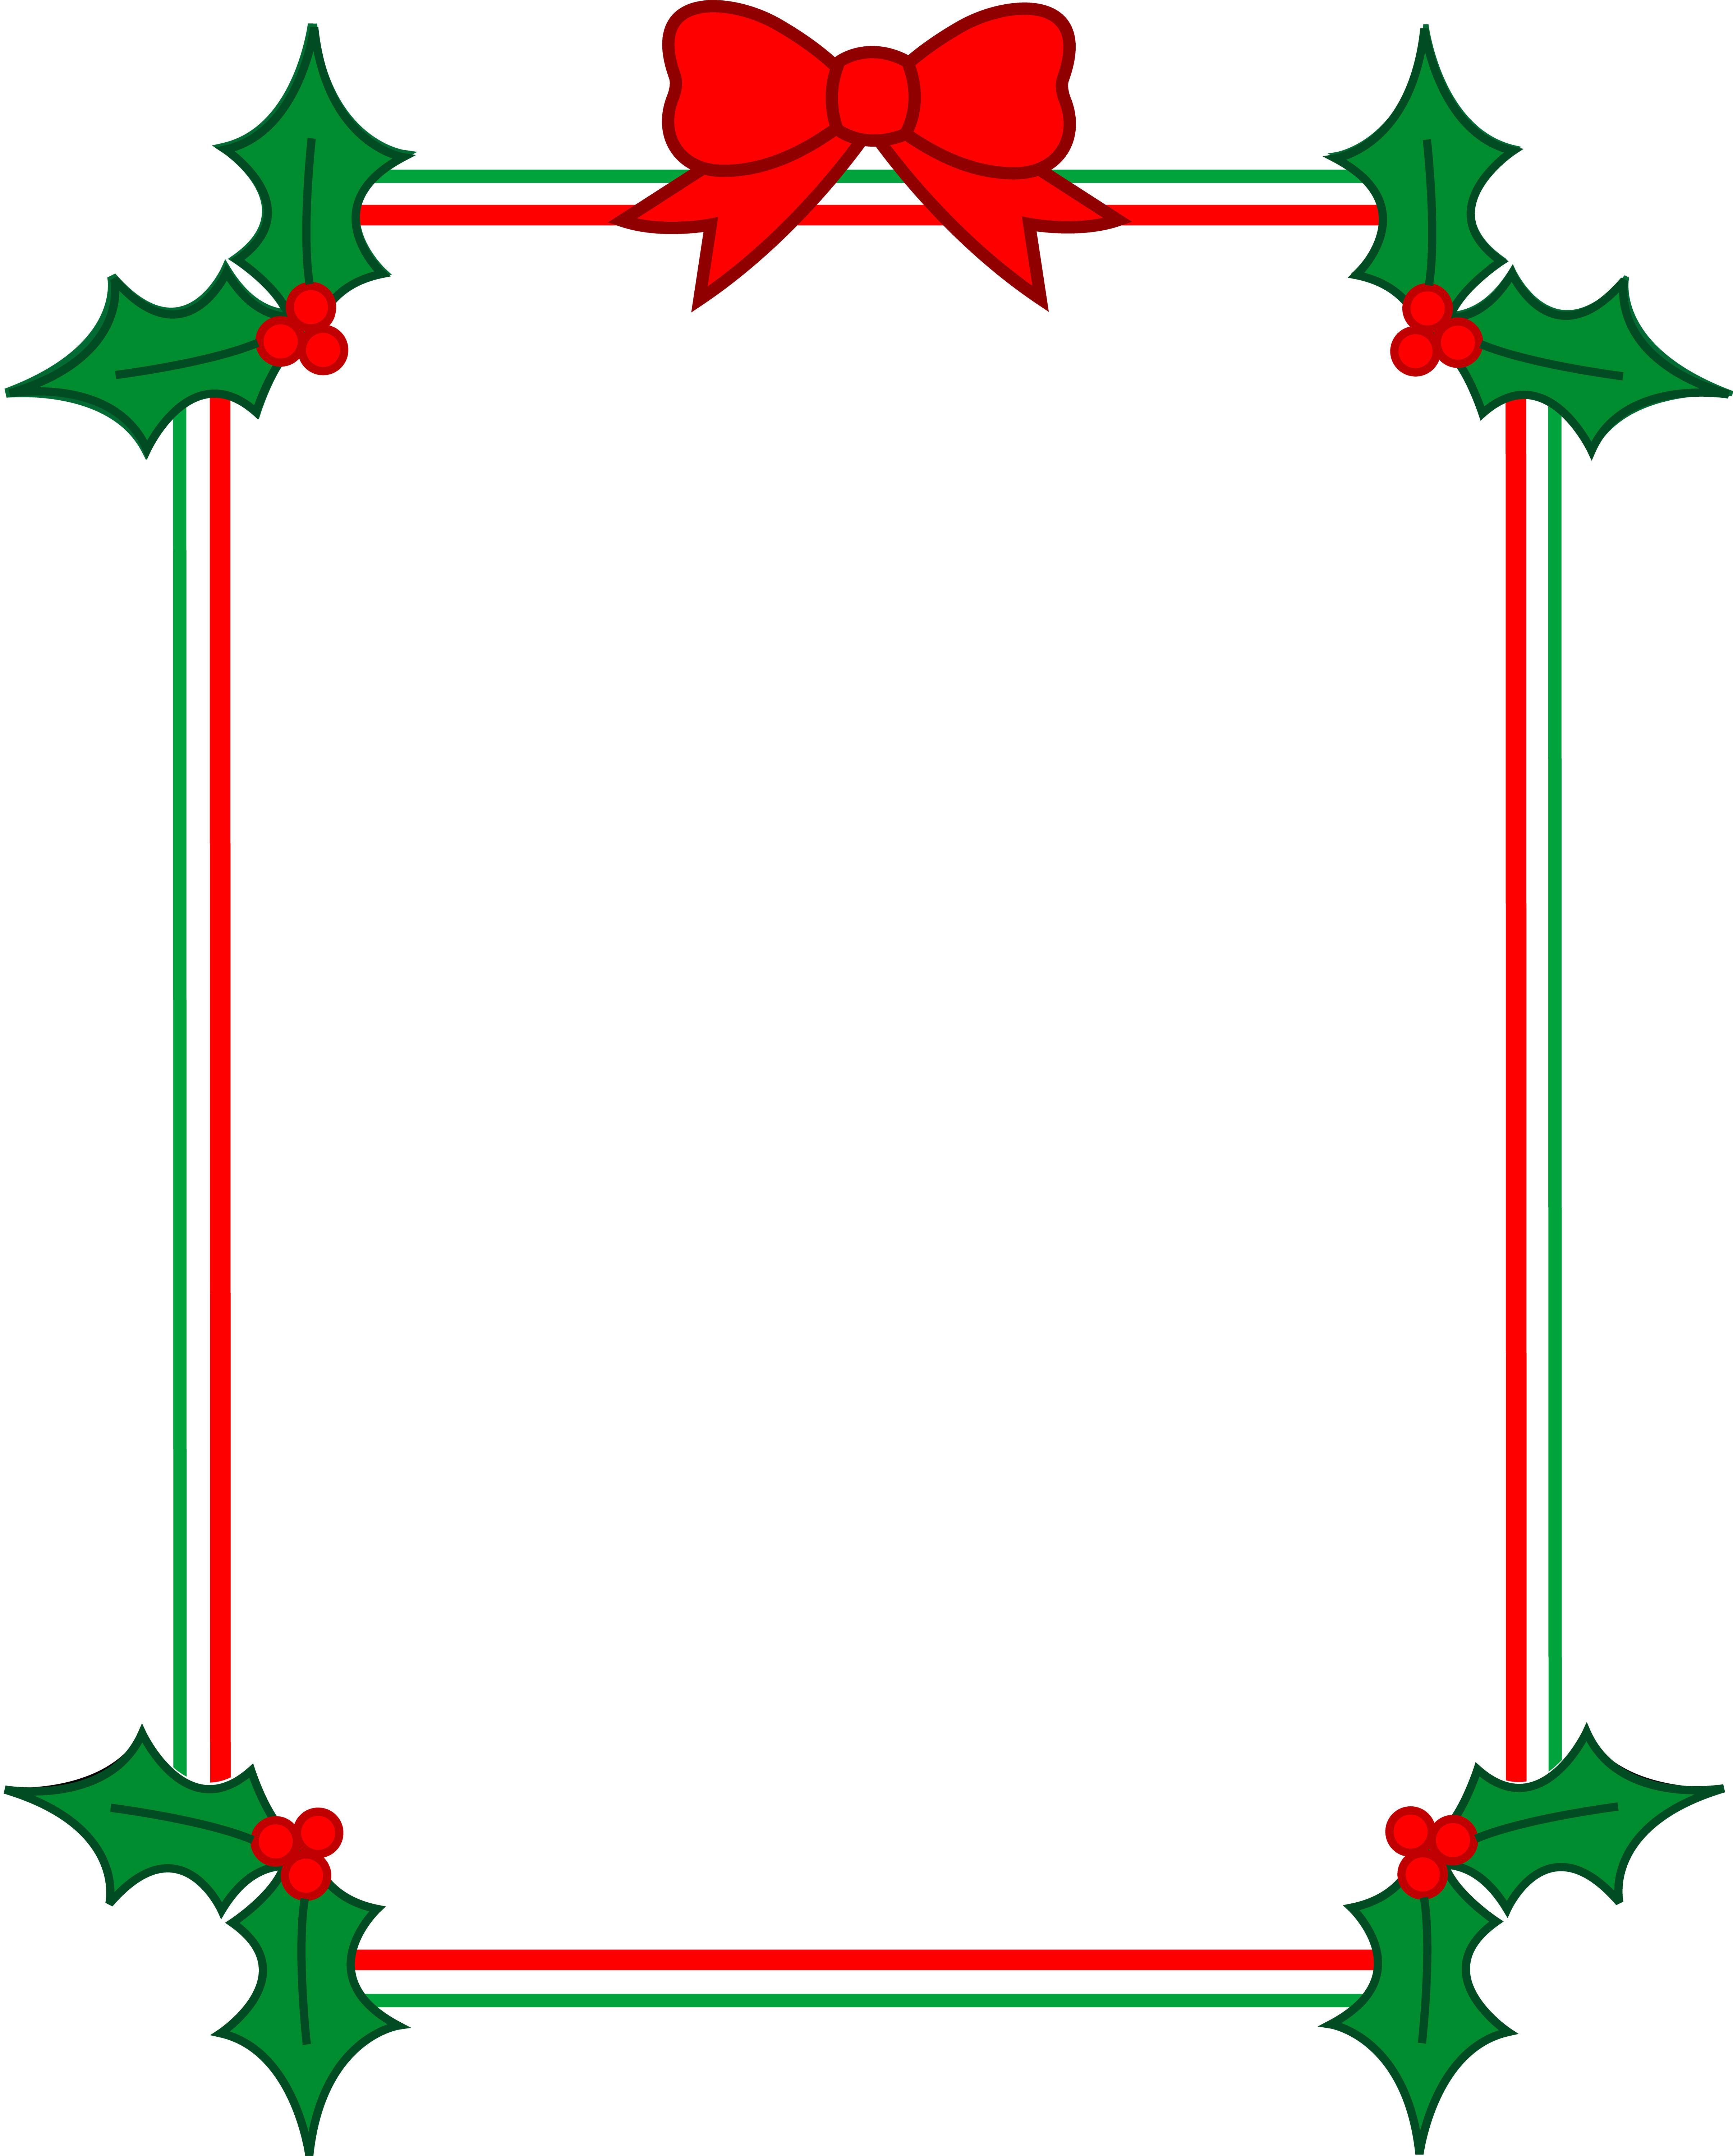 10 Christmas Page Borders For Microsoft Word   Free Cliparts That You